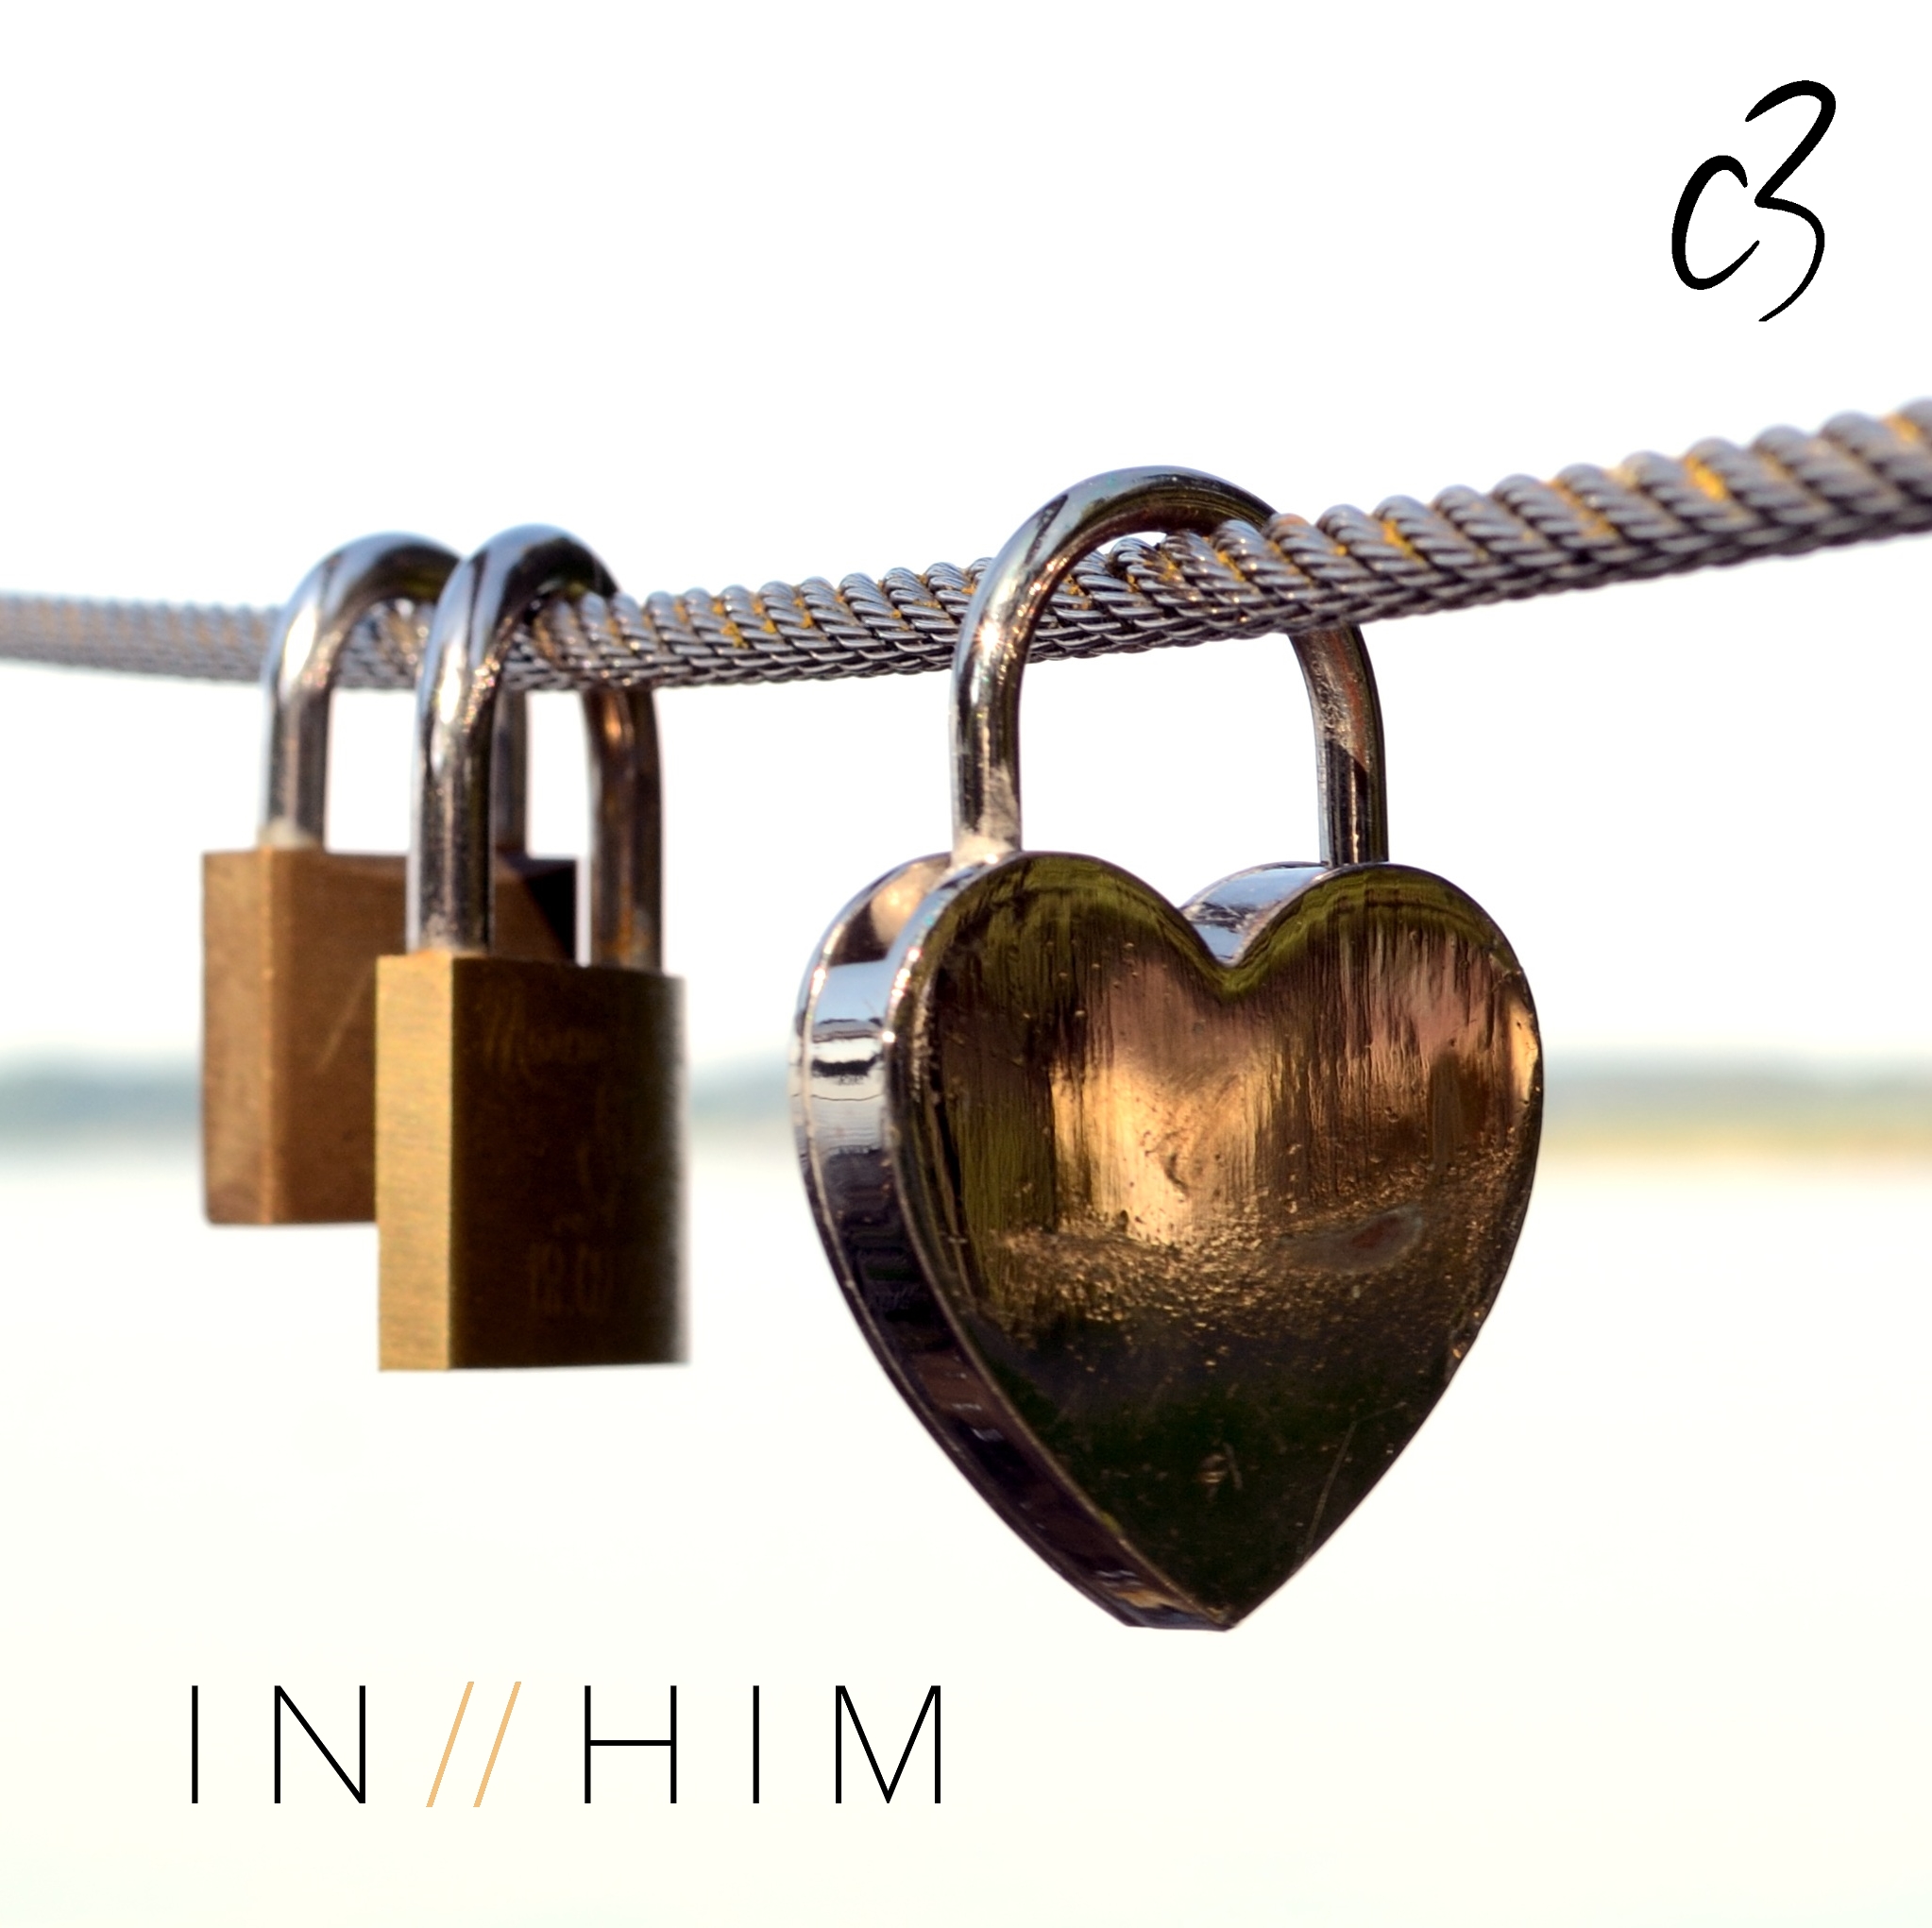 In Him - Redemption - Ps Steve Hinton